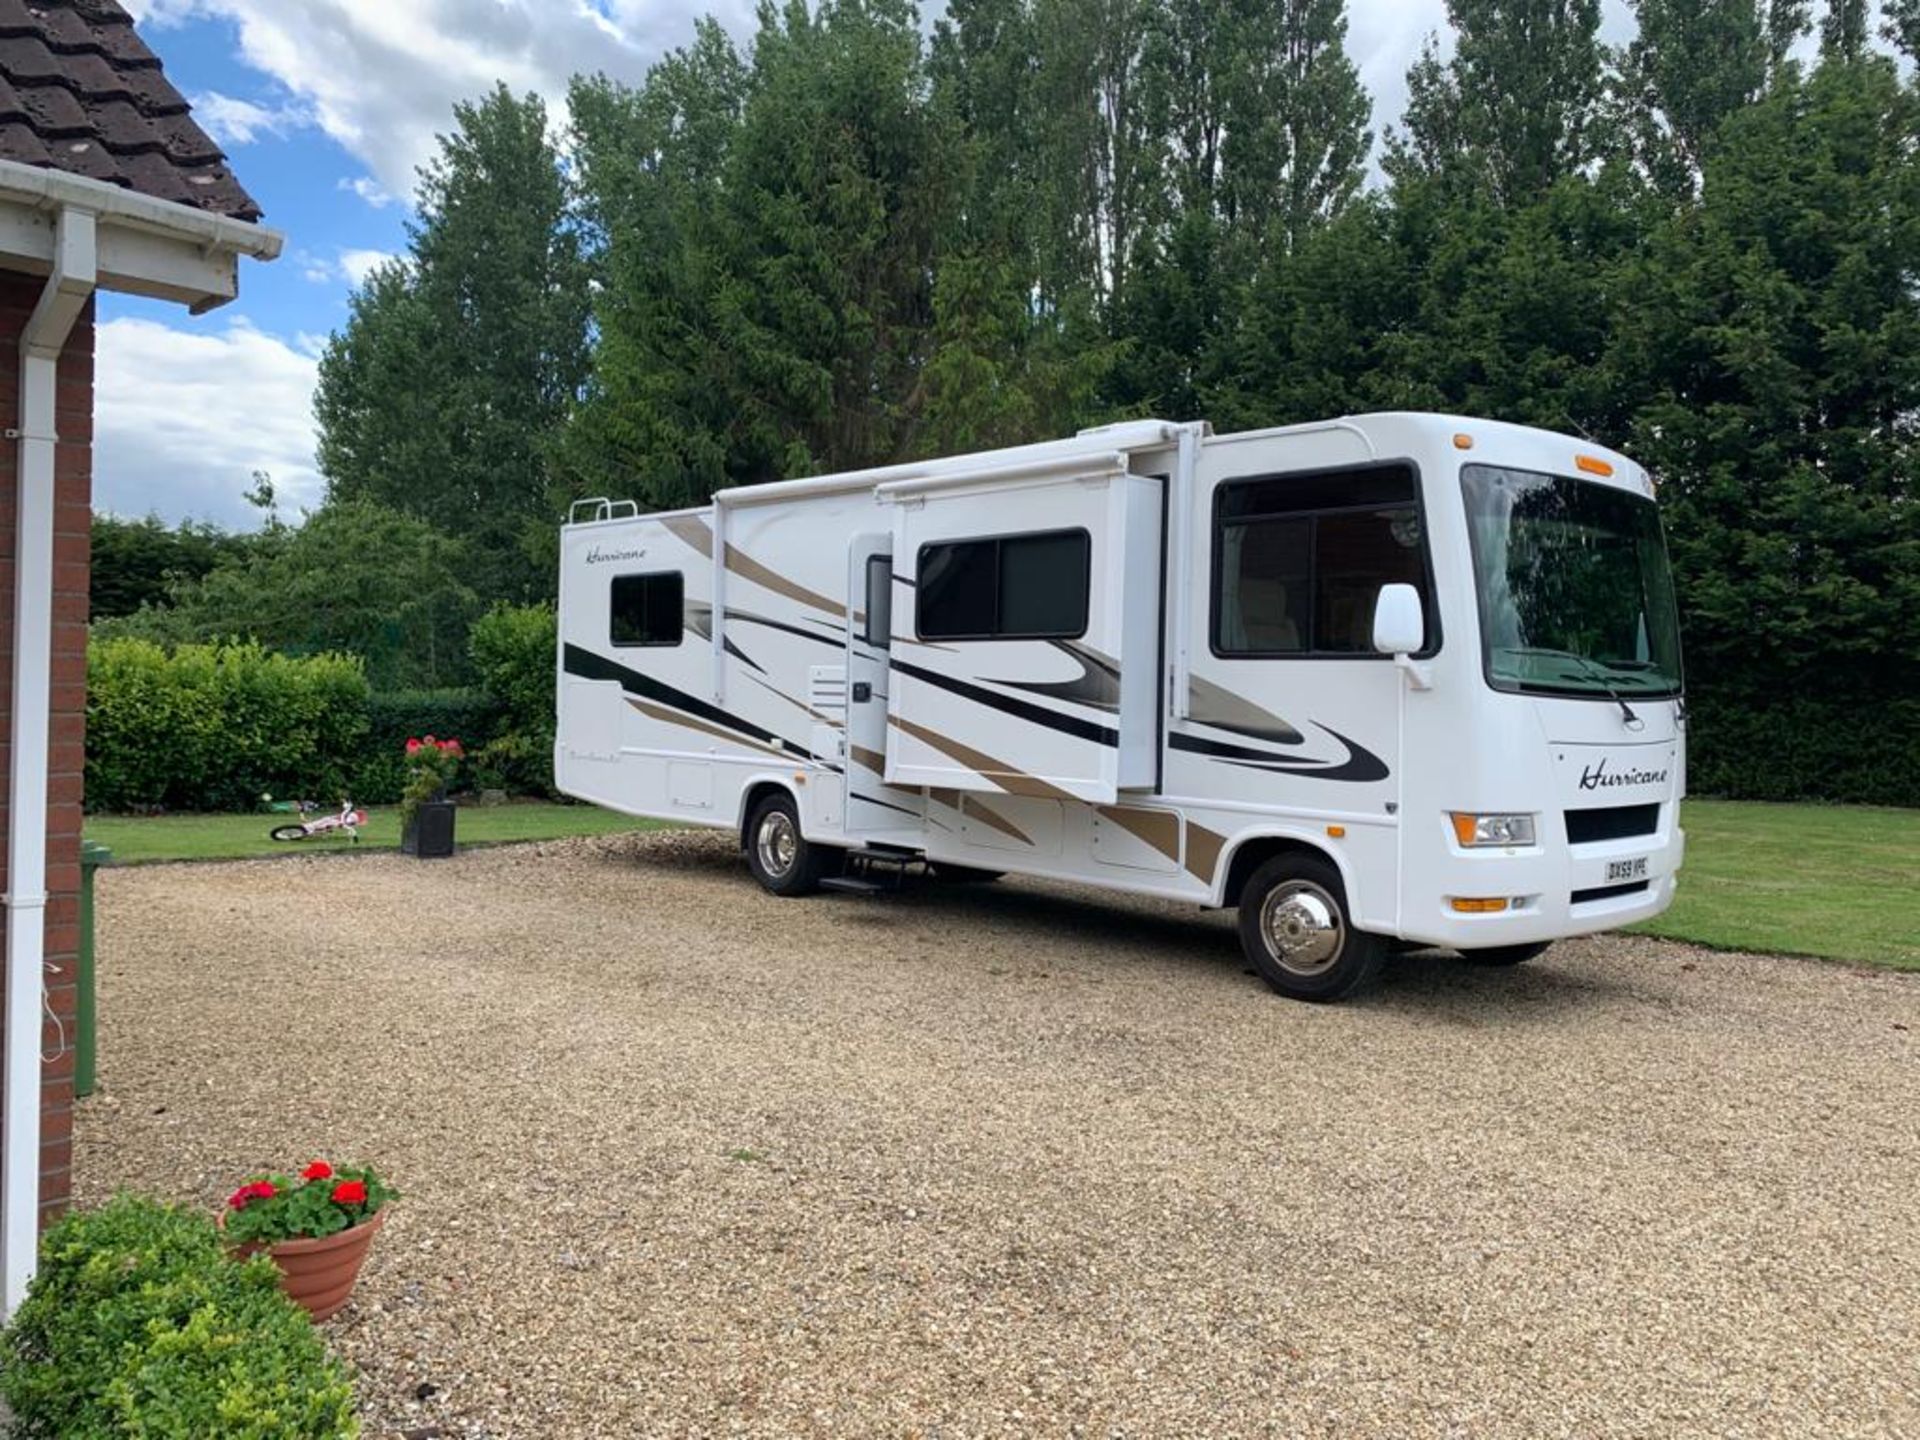 2009, RV Four Winds Hurricane Motorhome with Twin Slide Out (no VAT on hammer)